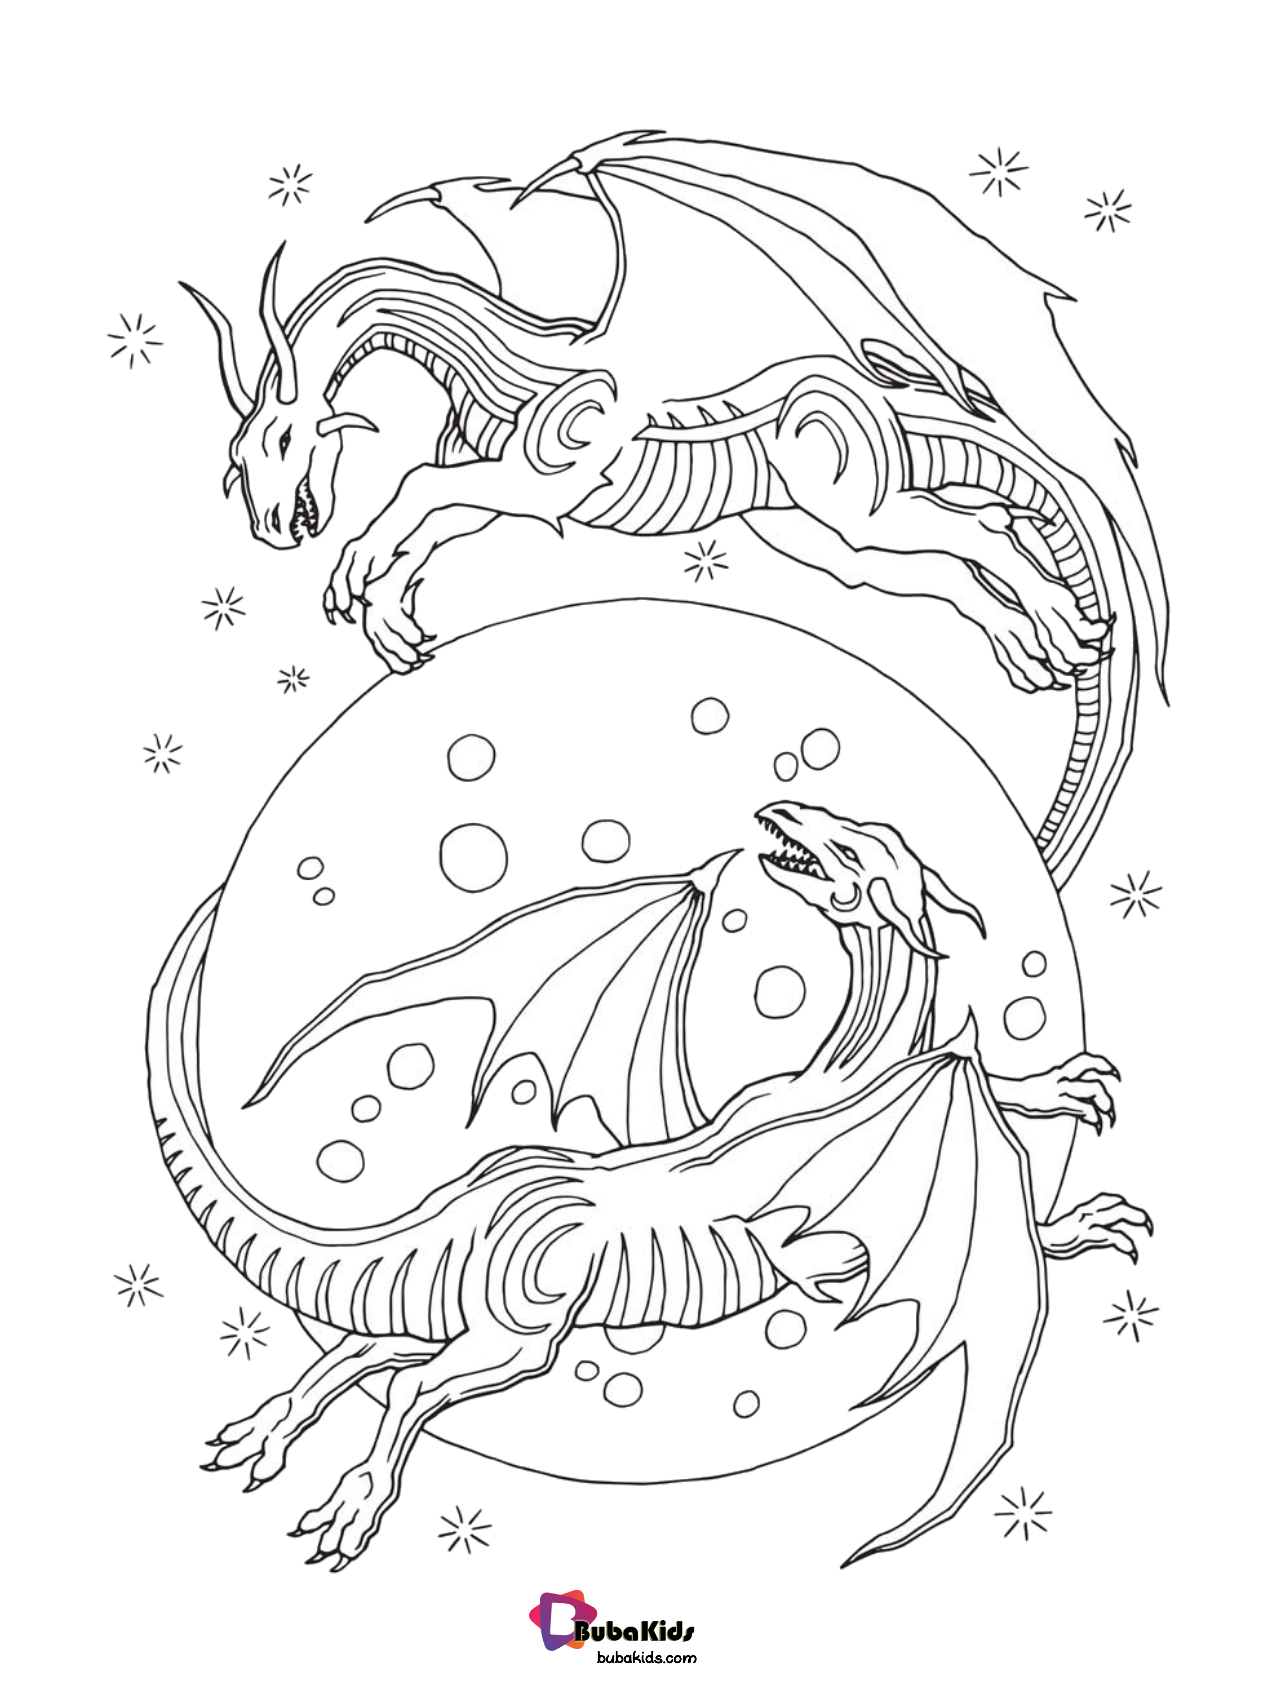 Dragon legendary monster coloring page. Wallpaper